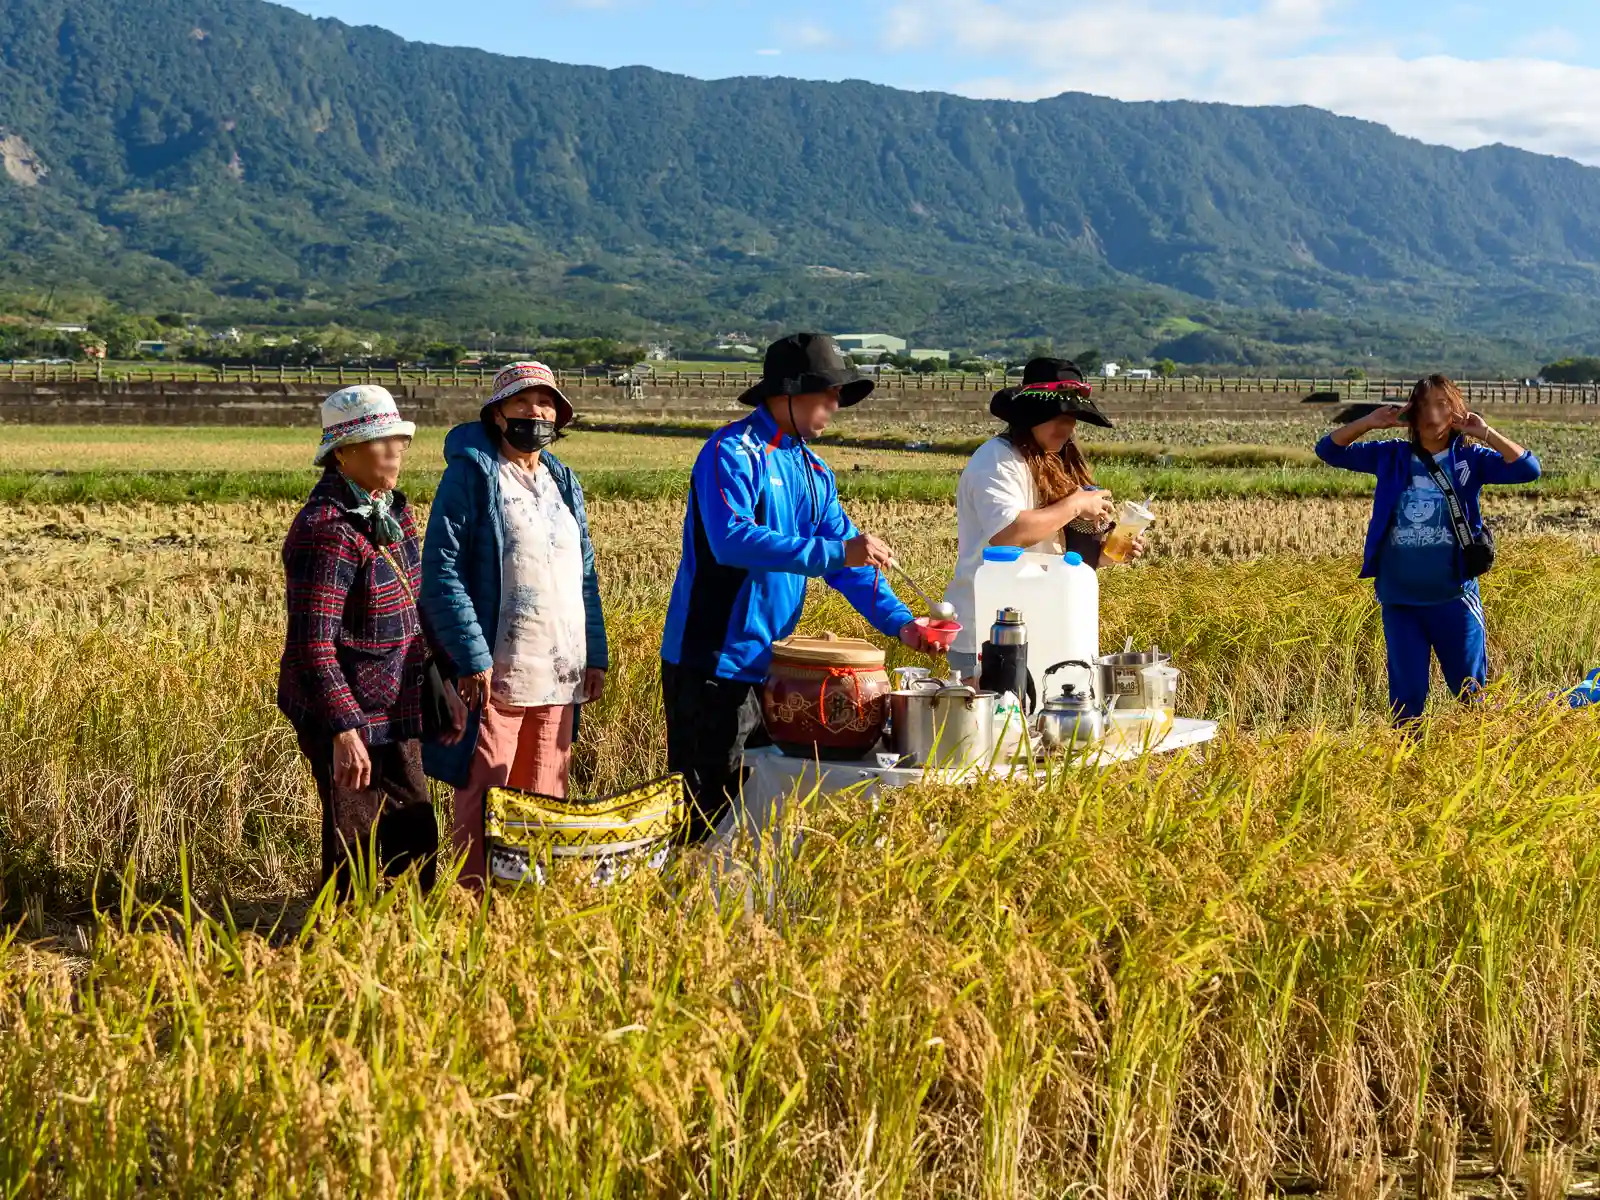 A family of farmers stands around a table with refreshments in the middle of a rice field.